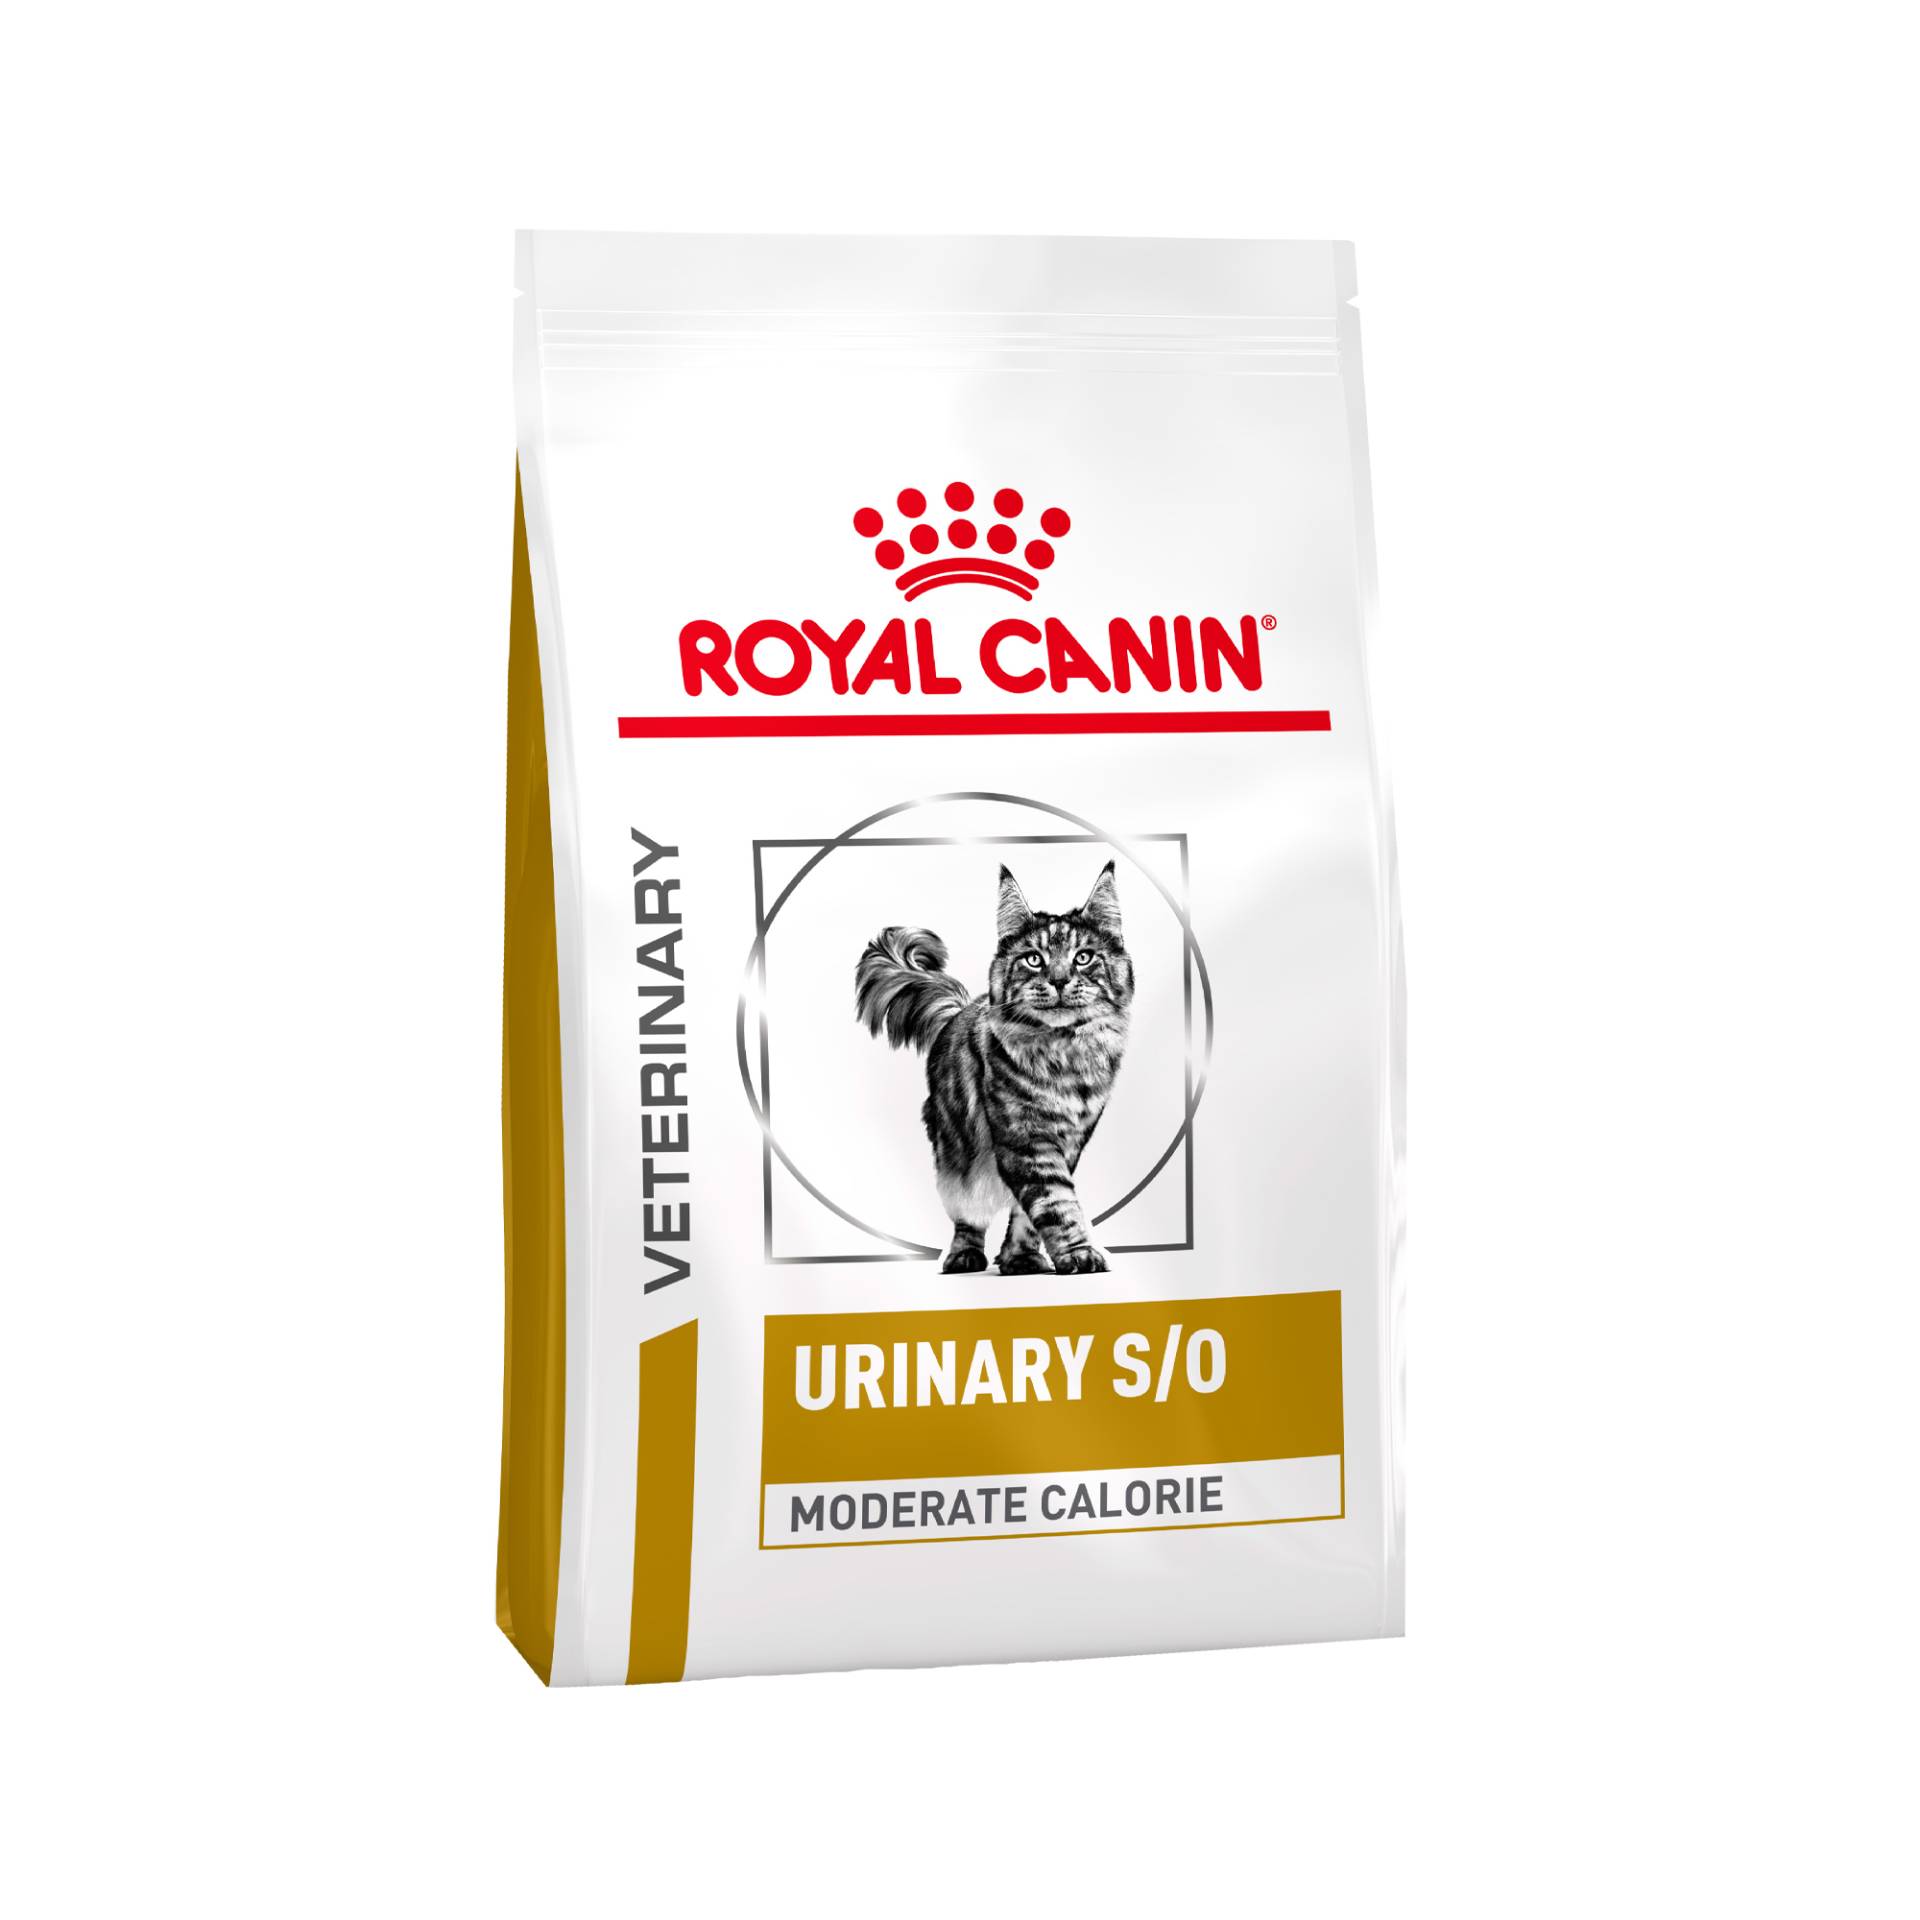 Royal Canin Urinary S/O Moderate Calorie Katze Sparpaket - 9 kg + 12 x 85 g von Royal Canin